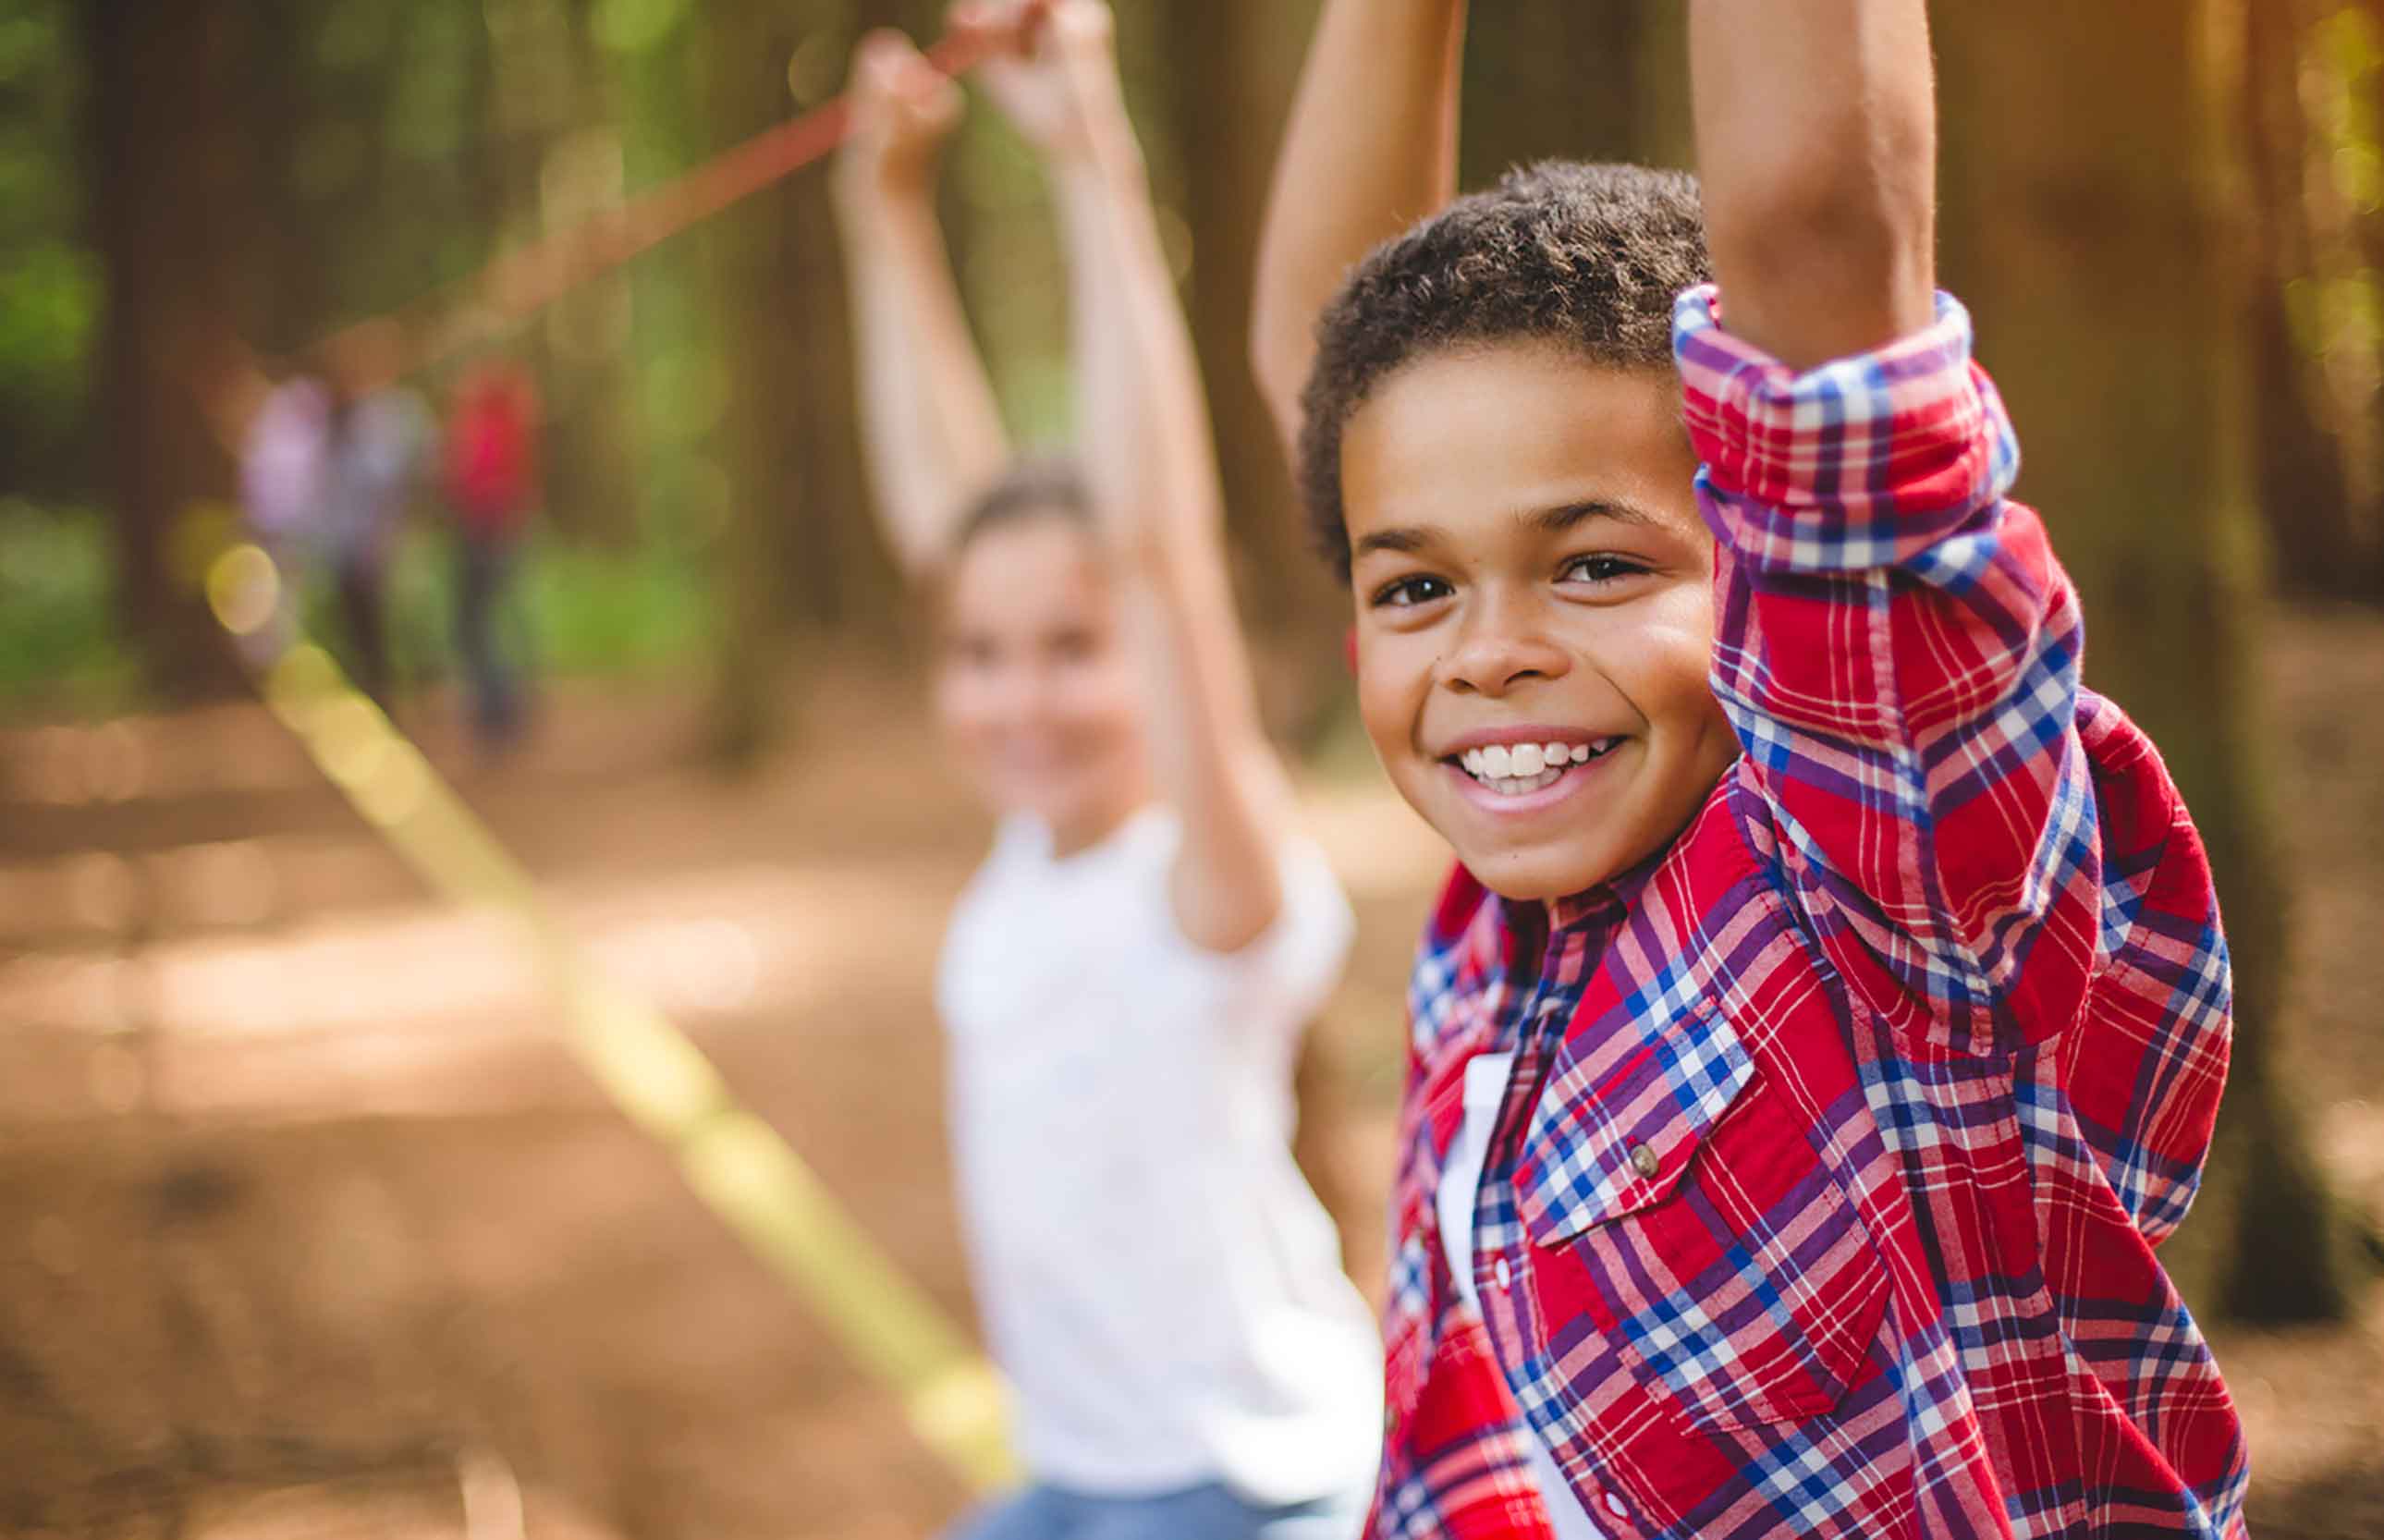 Affording summer camp can be a struggle for many working families. Here are a few ways to make camp fit any family budget.